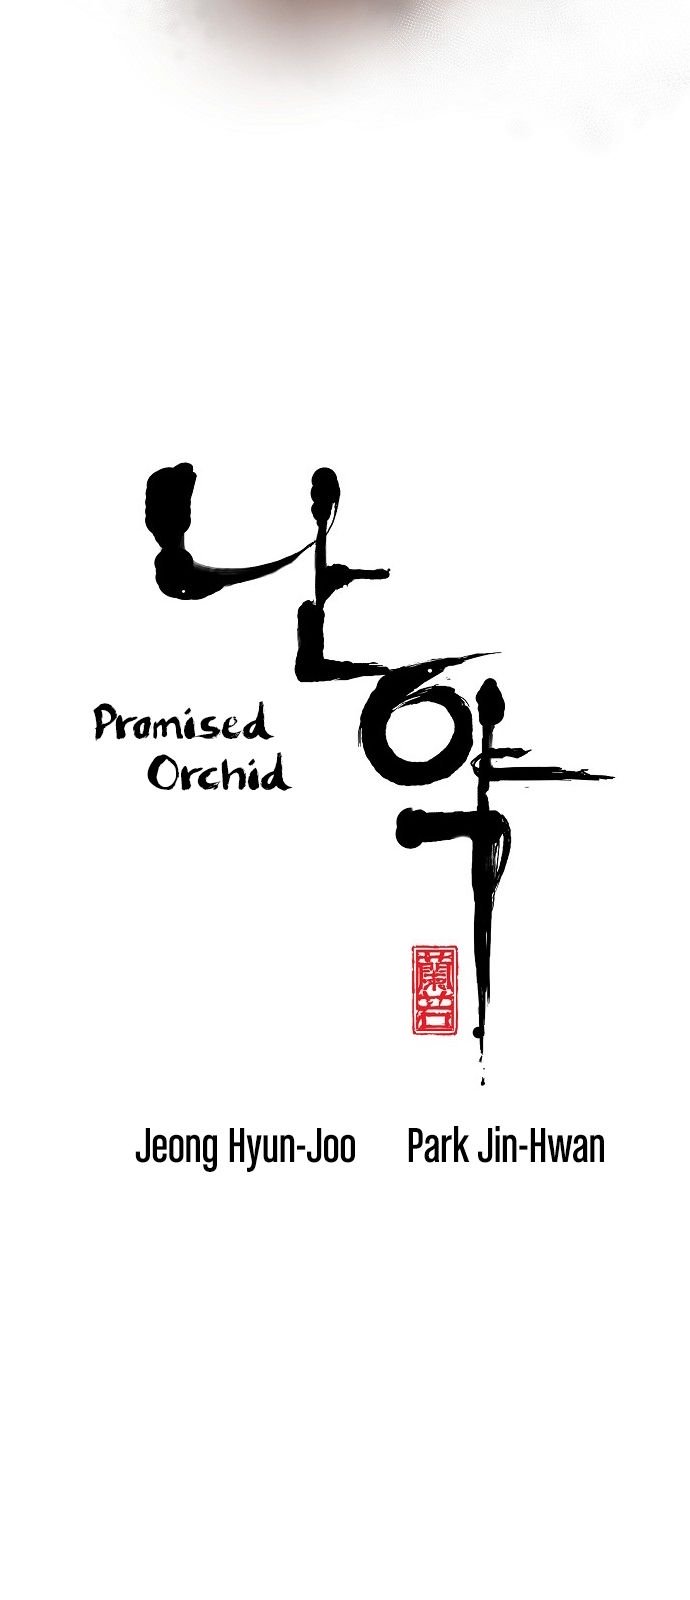 Chapters, Promised Orchid Wiki